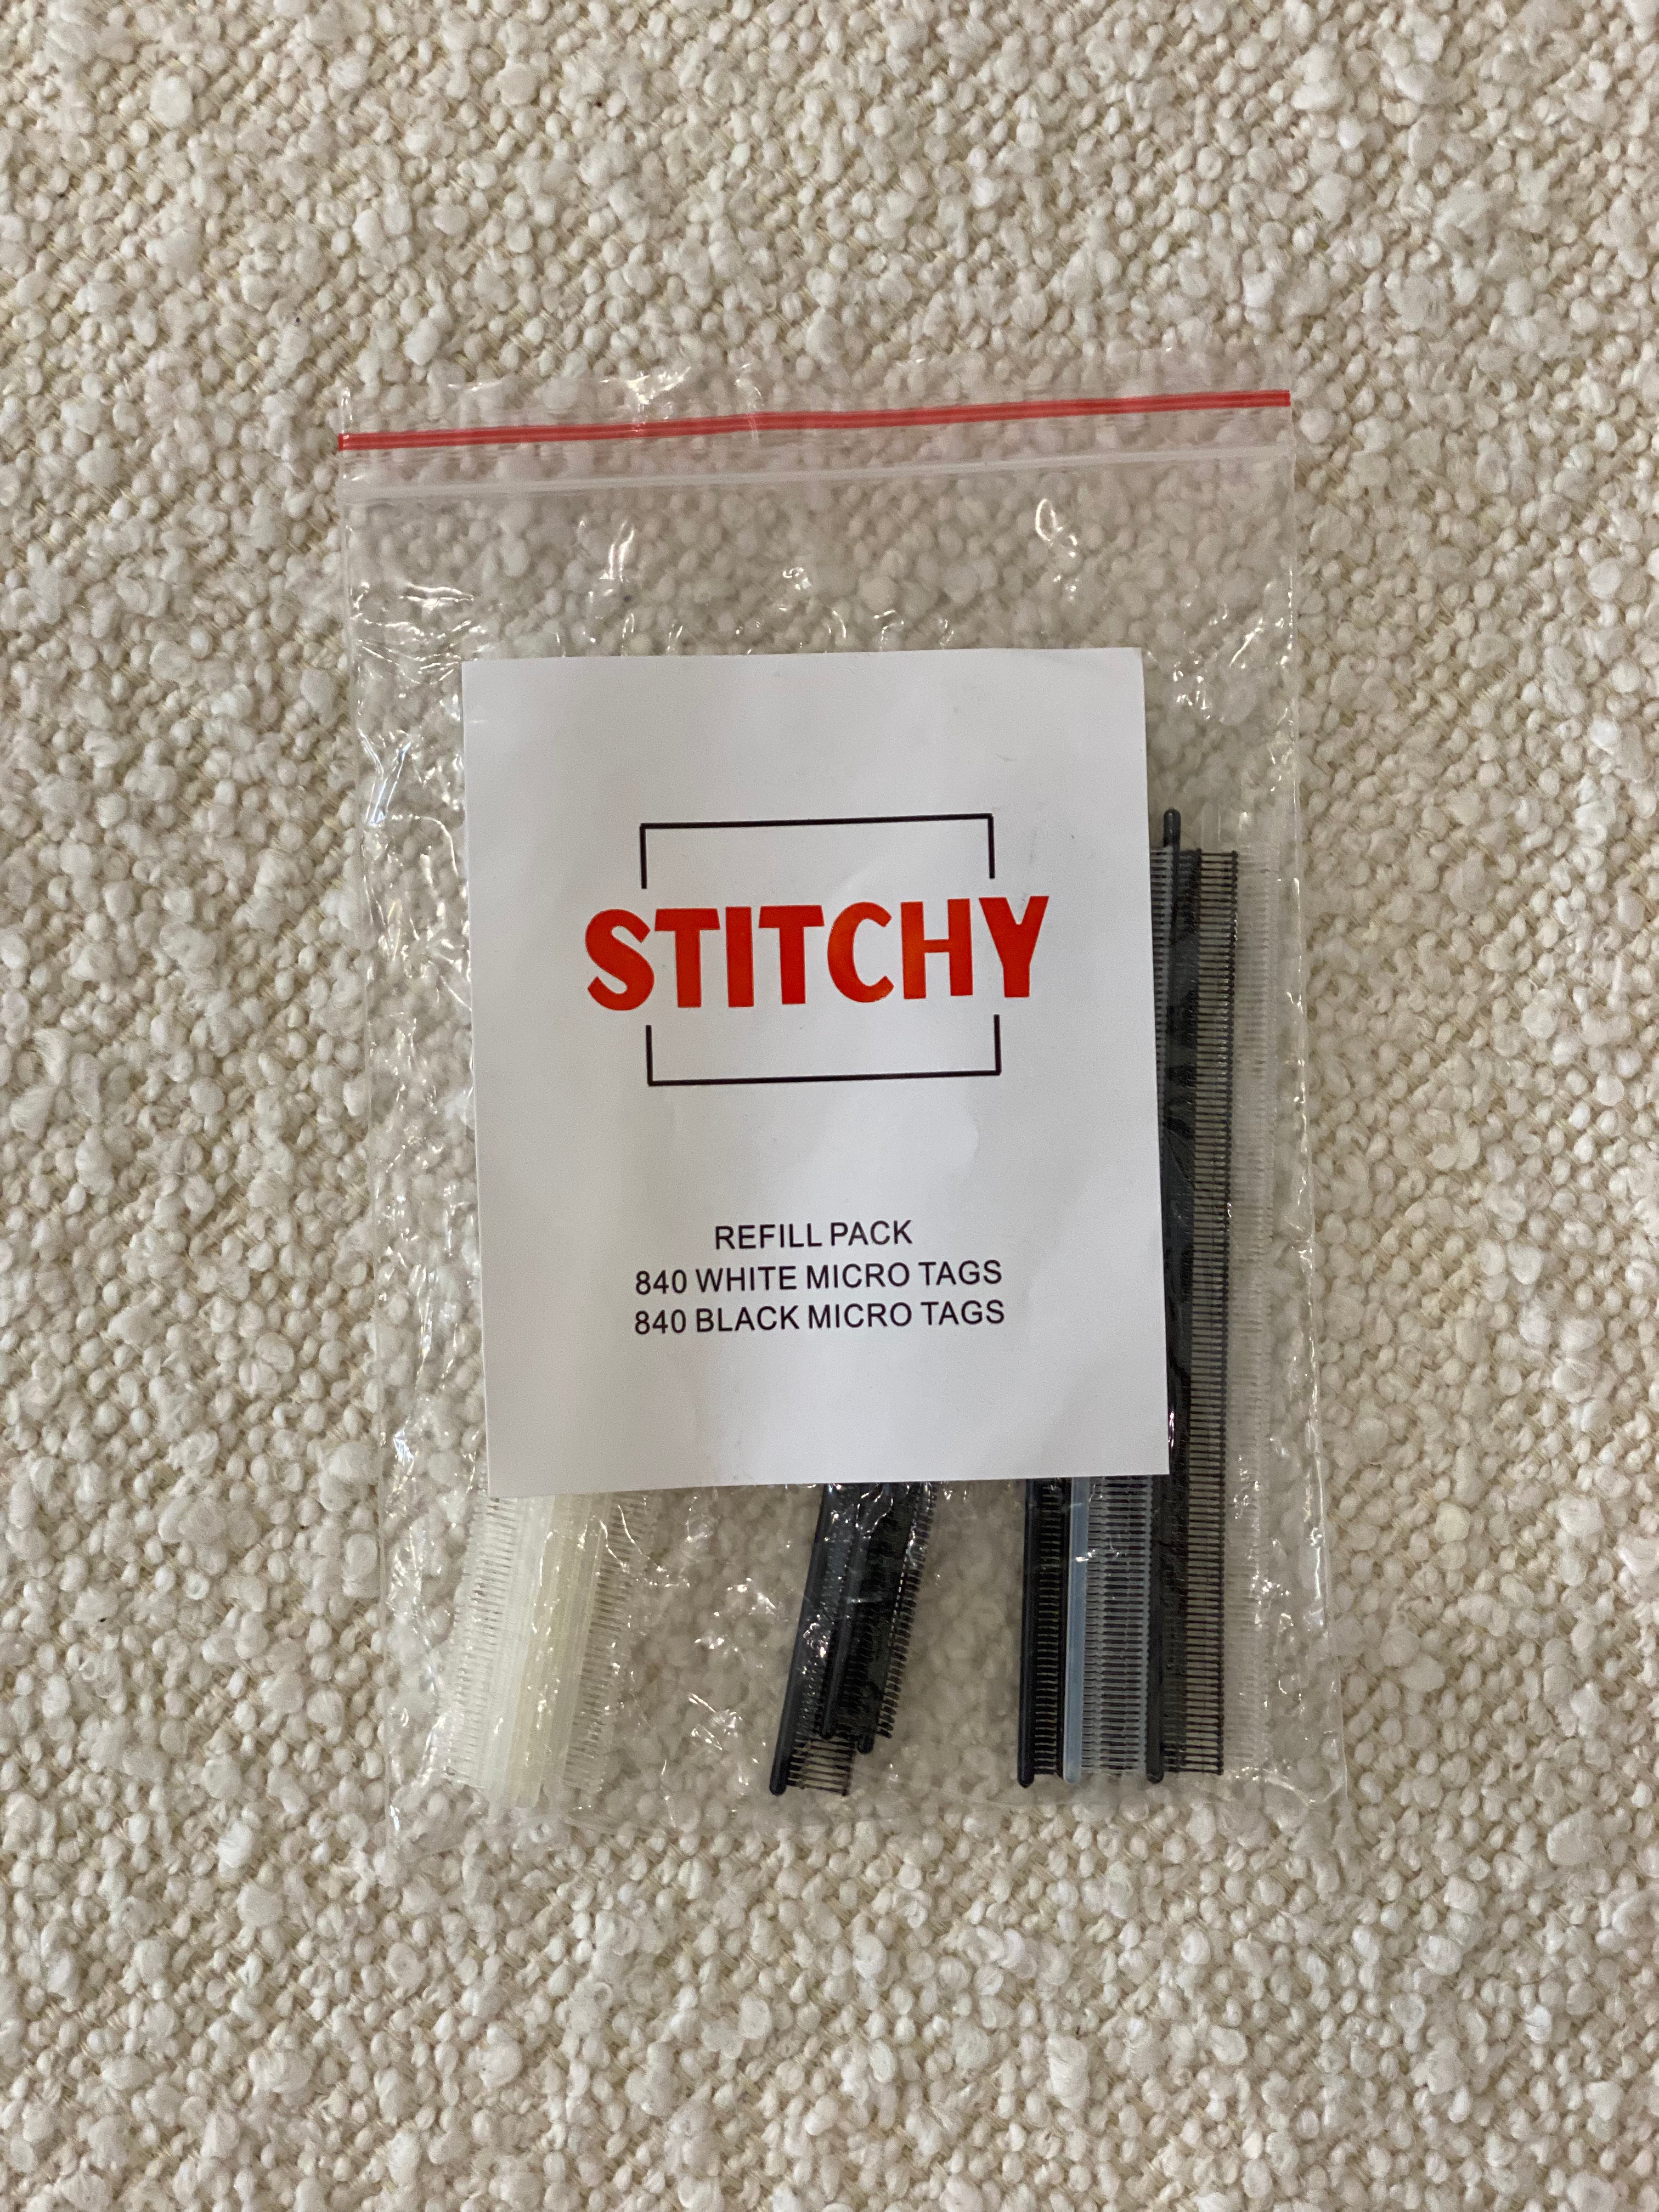 Stitchy Refill Pack